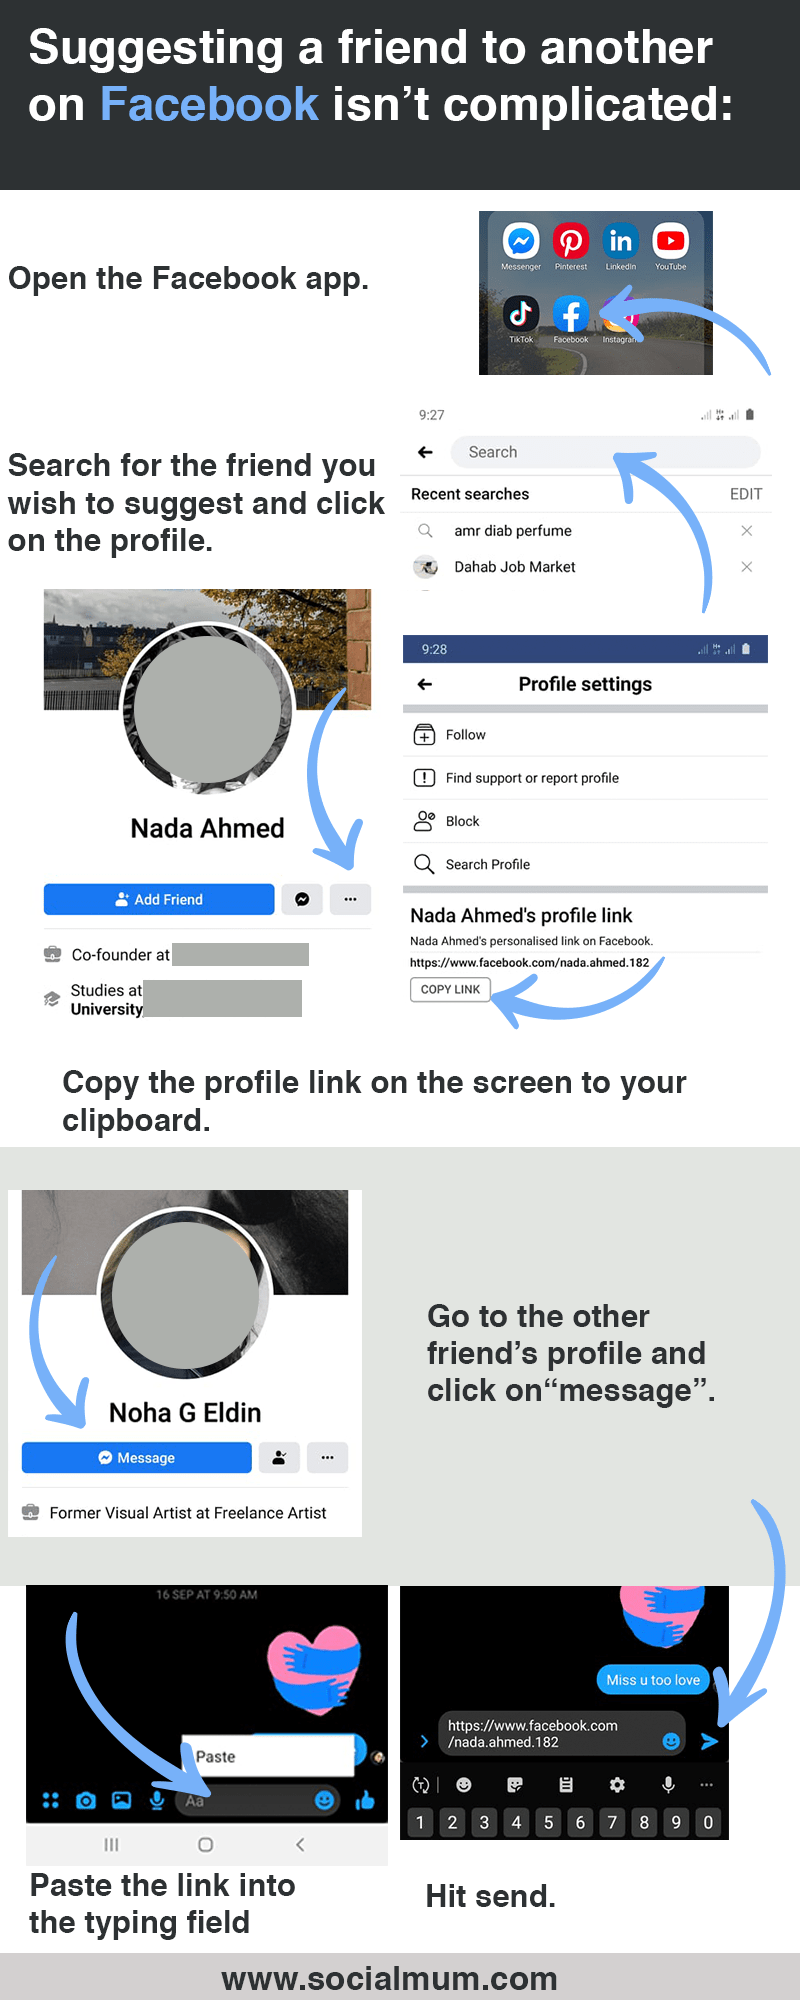 How to Suggest Friends on Facebook